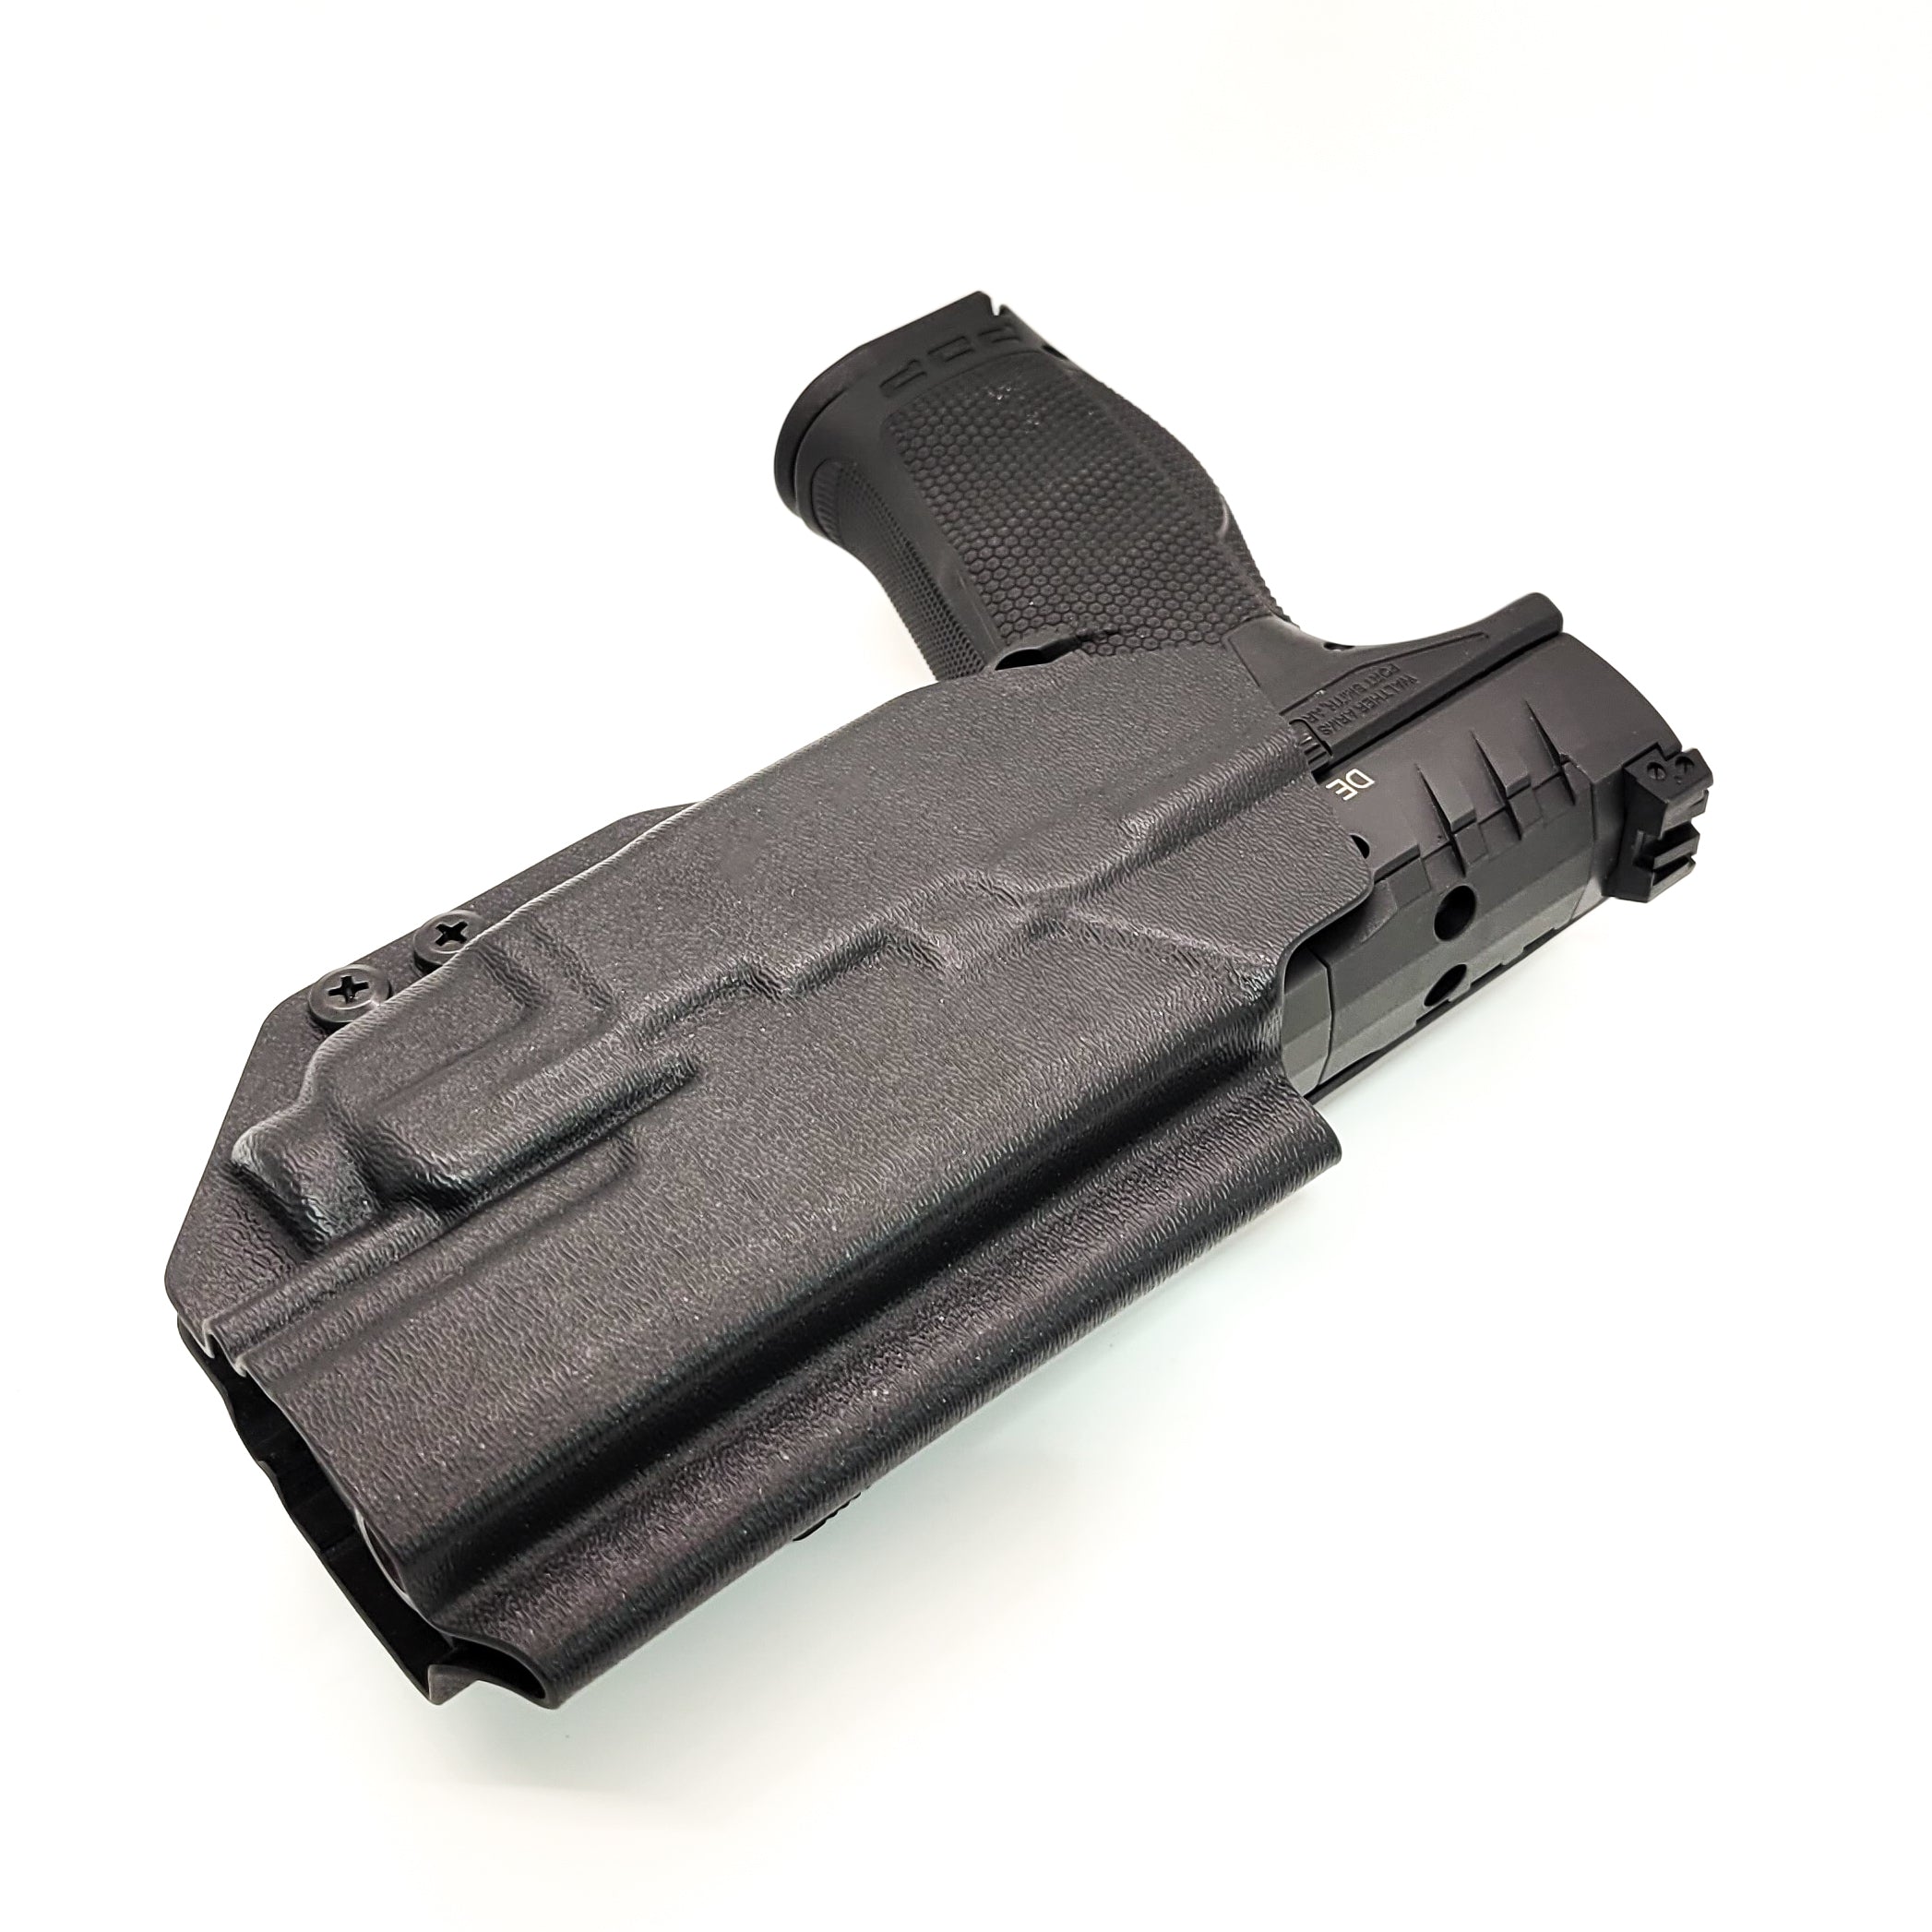 For the best Outside Waistband Taco Style Holster designed to fit the Walther PDP 4.5" Full-Size pistol with the Streamlight TLR-7A or TLR-7 mounted on the firearm, shop Four Brothers Holsters. Cut for red dot sight, full sweat guard, adjustable retention & open muzzle for threaded barrels & compensators.